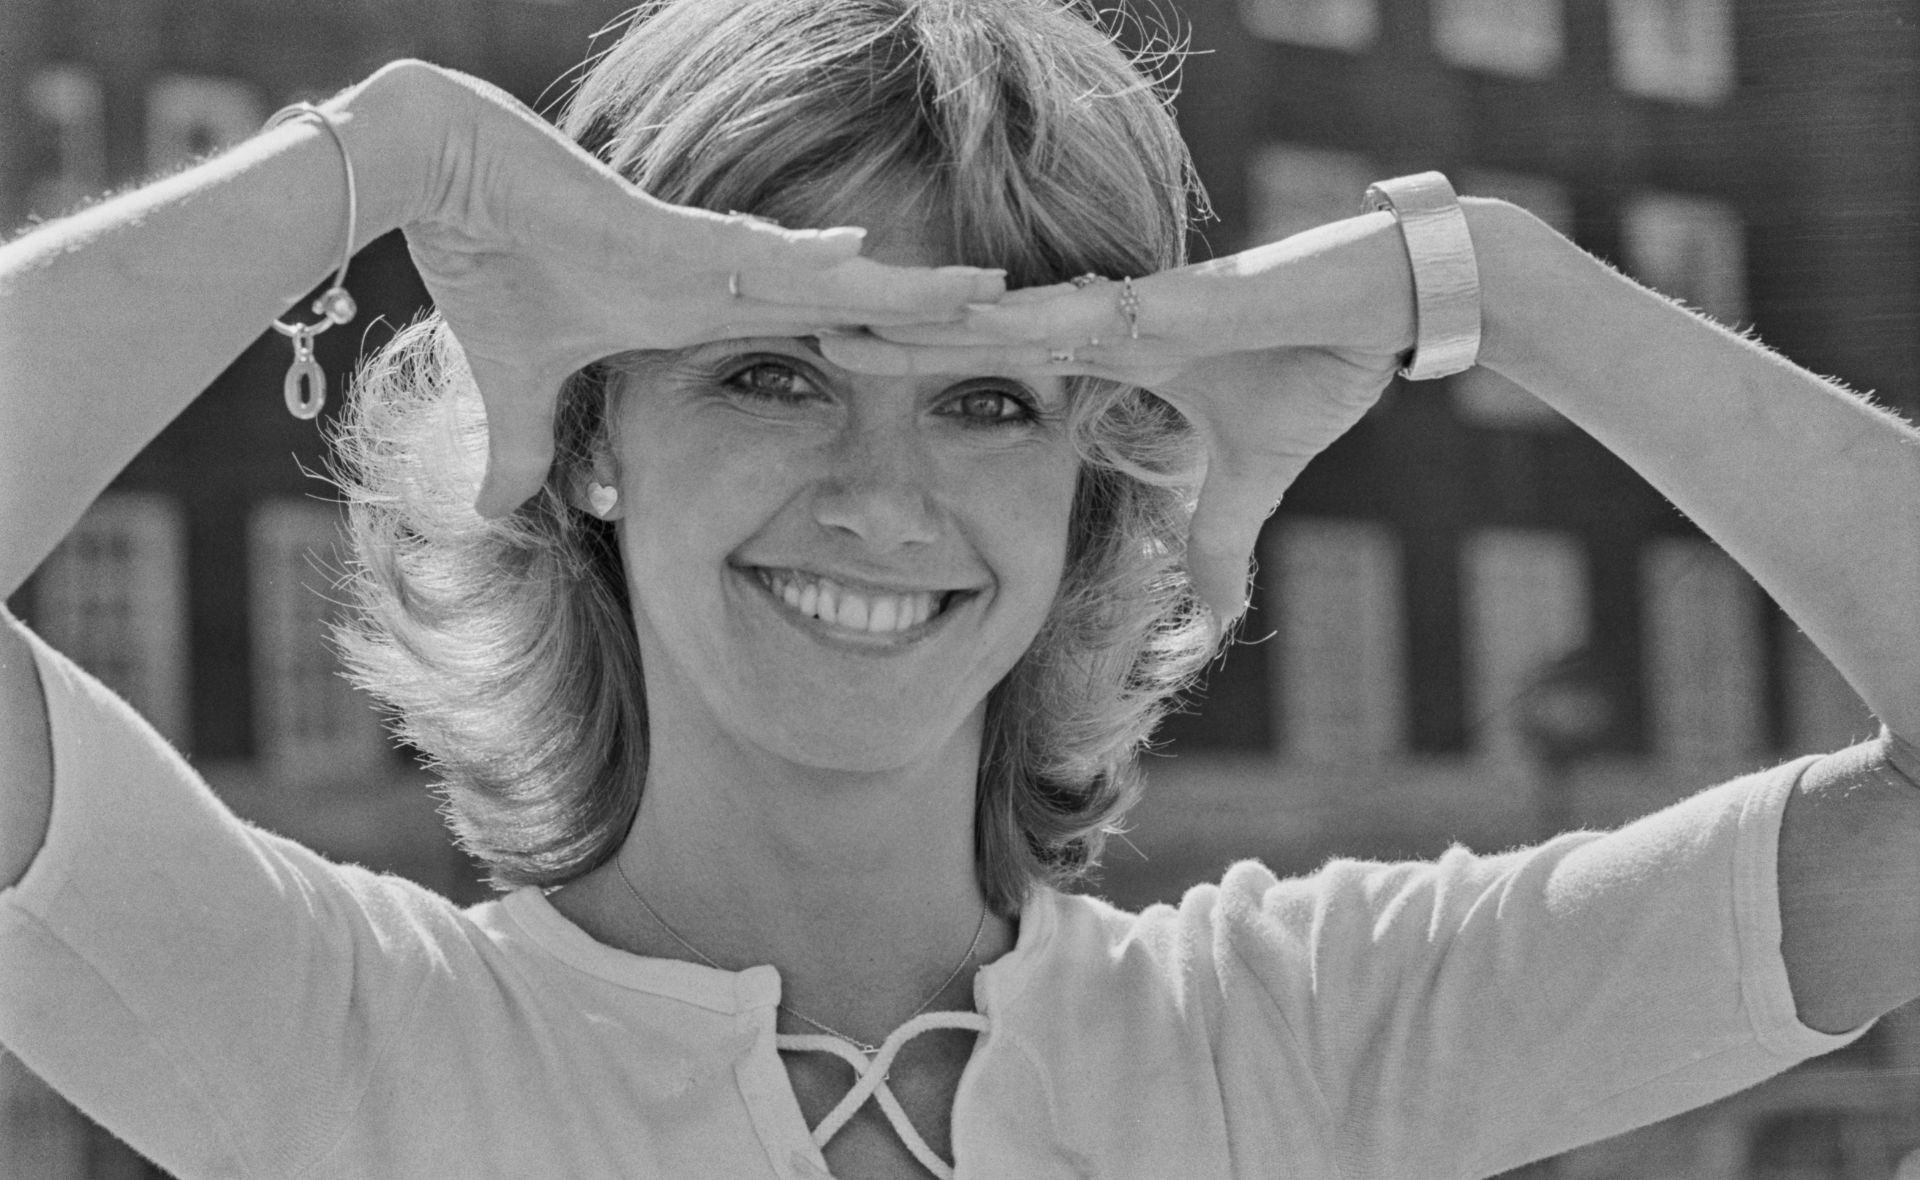 Remembering Olivia Newton-John’s career and honouring the legacy she leaves behind